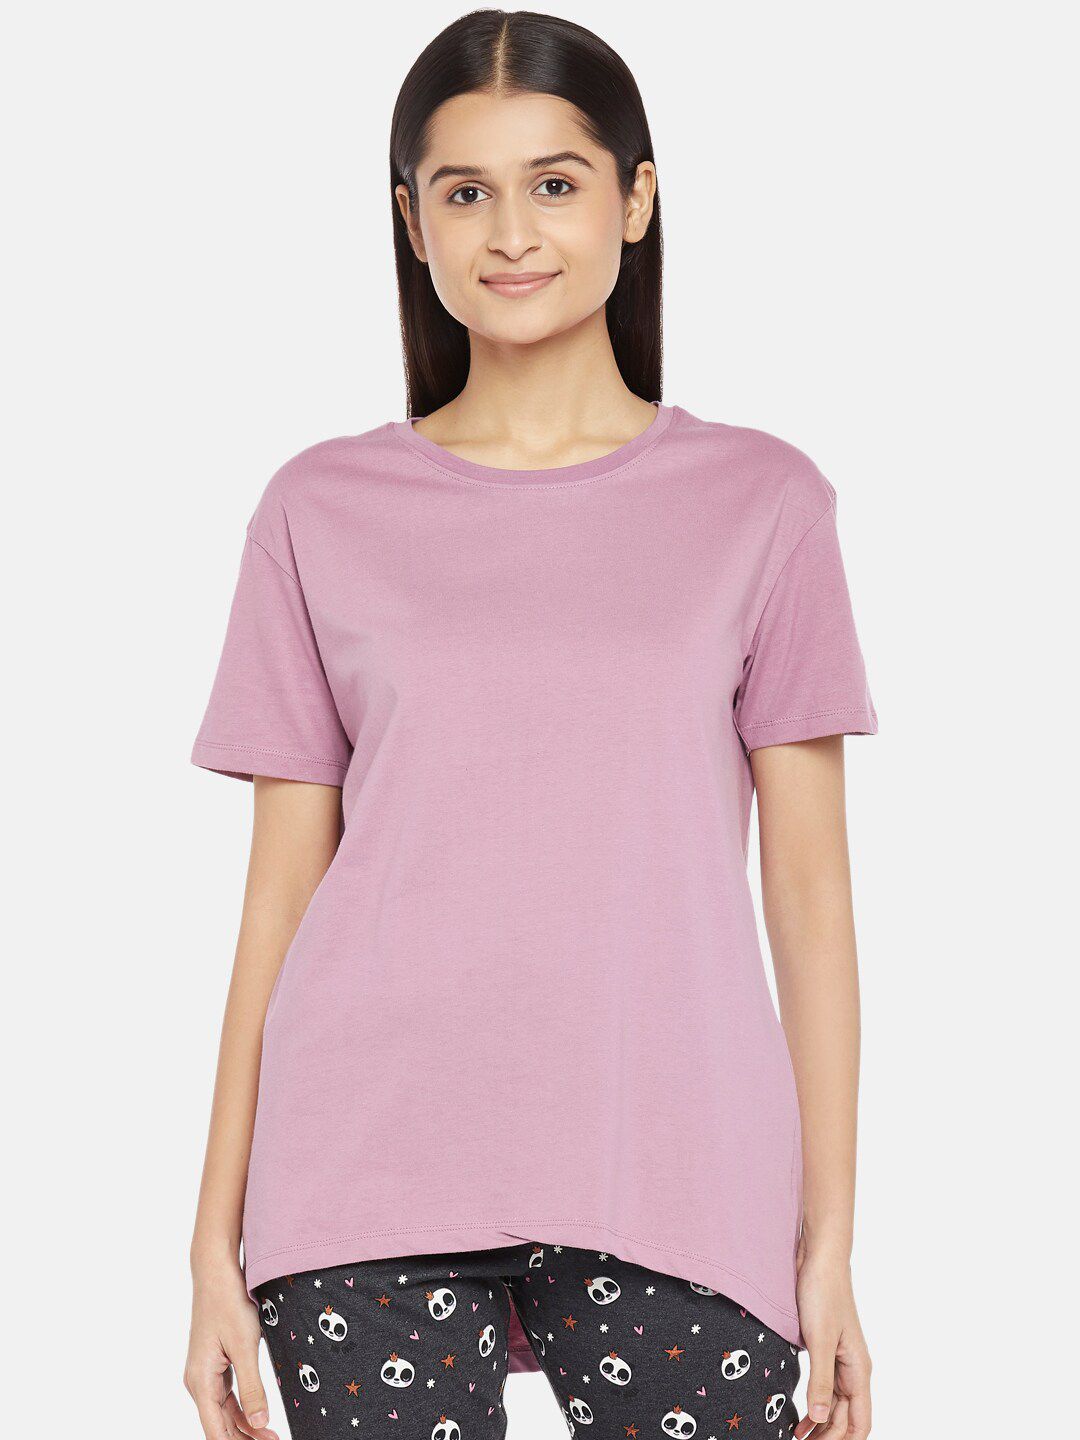 Dreamz by Pantaloons Women Mauve Solid Pure Cotton Lounge T-shirt Price in India